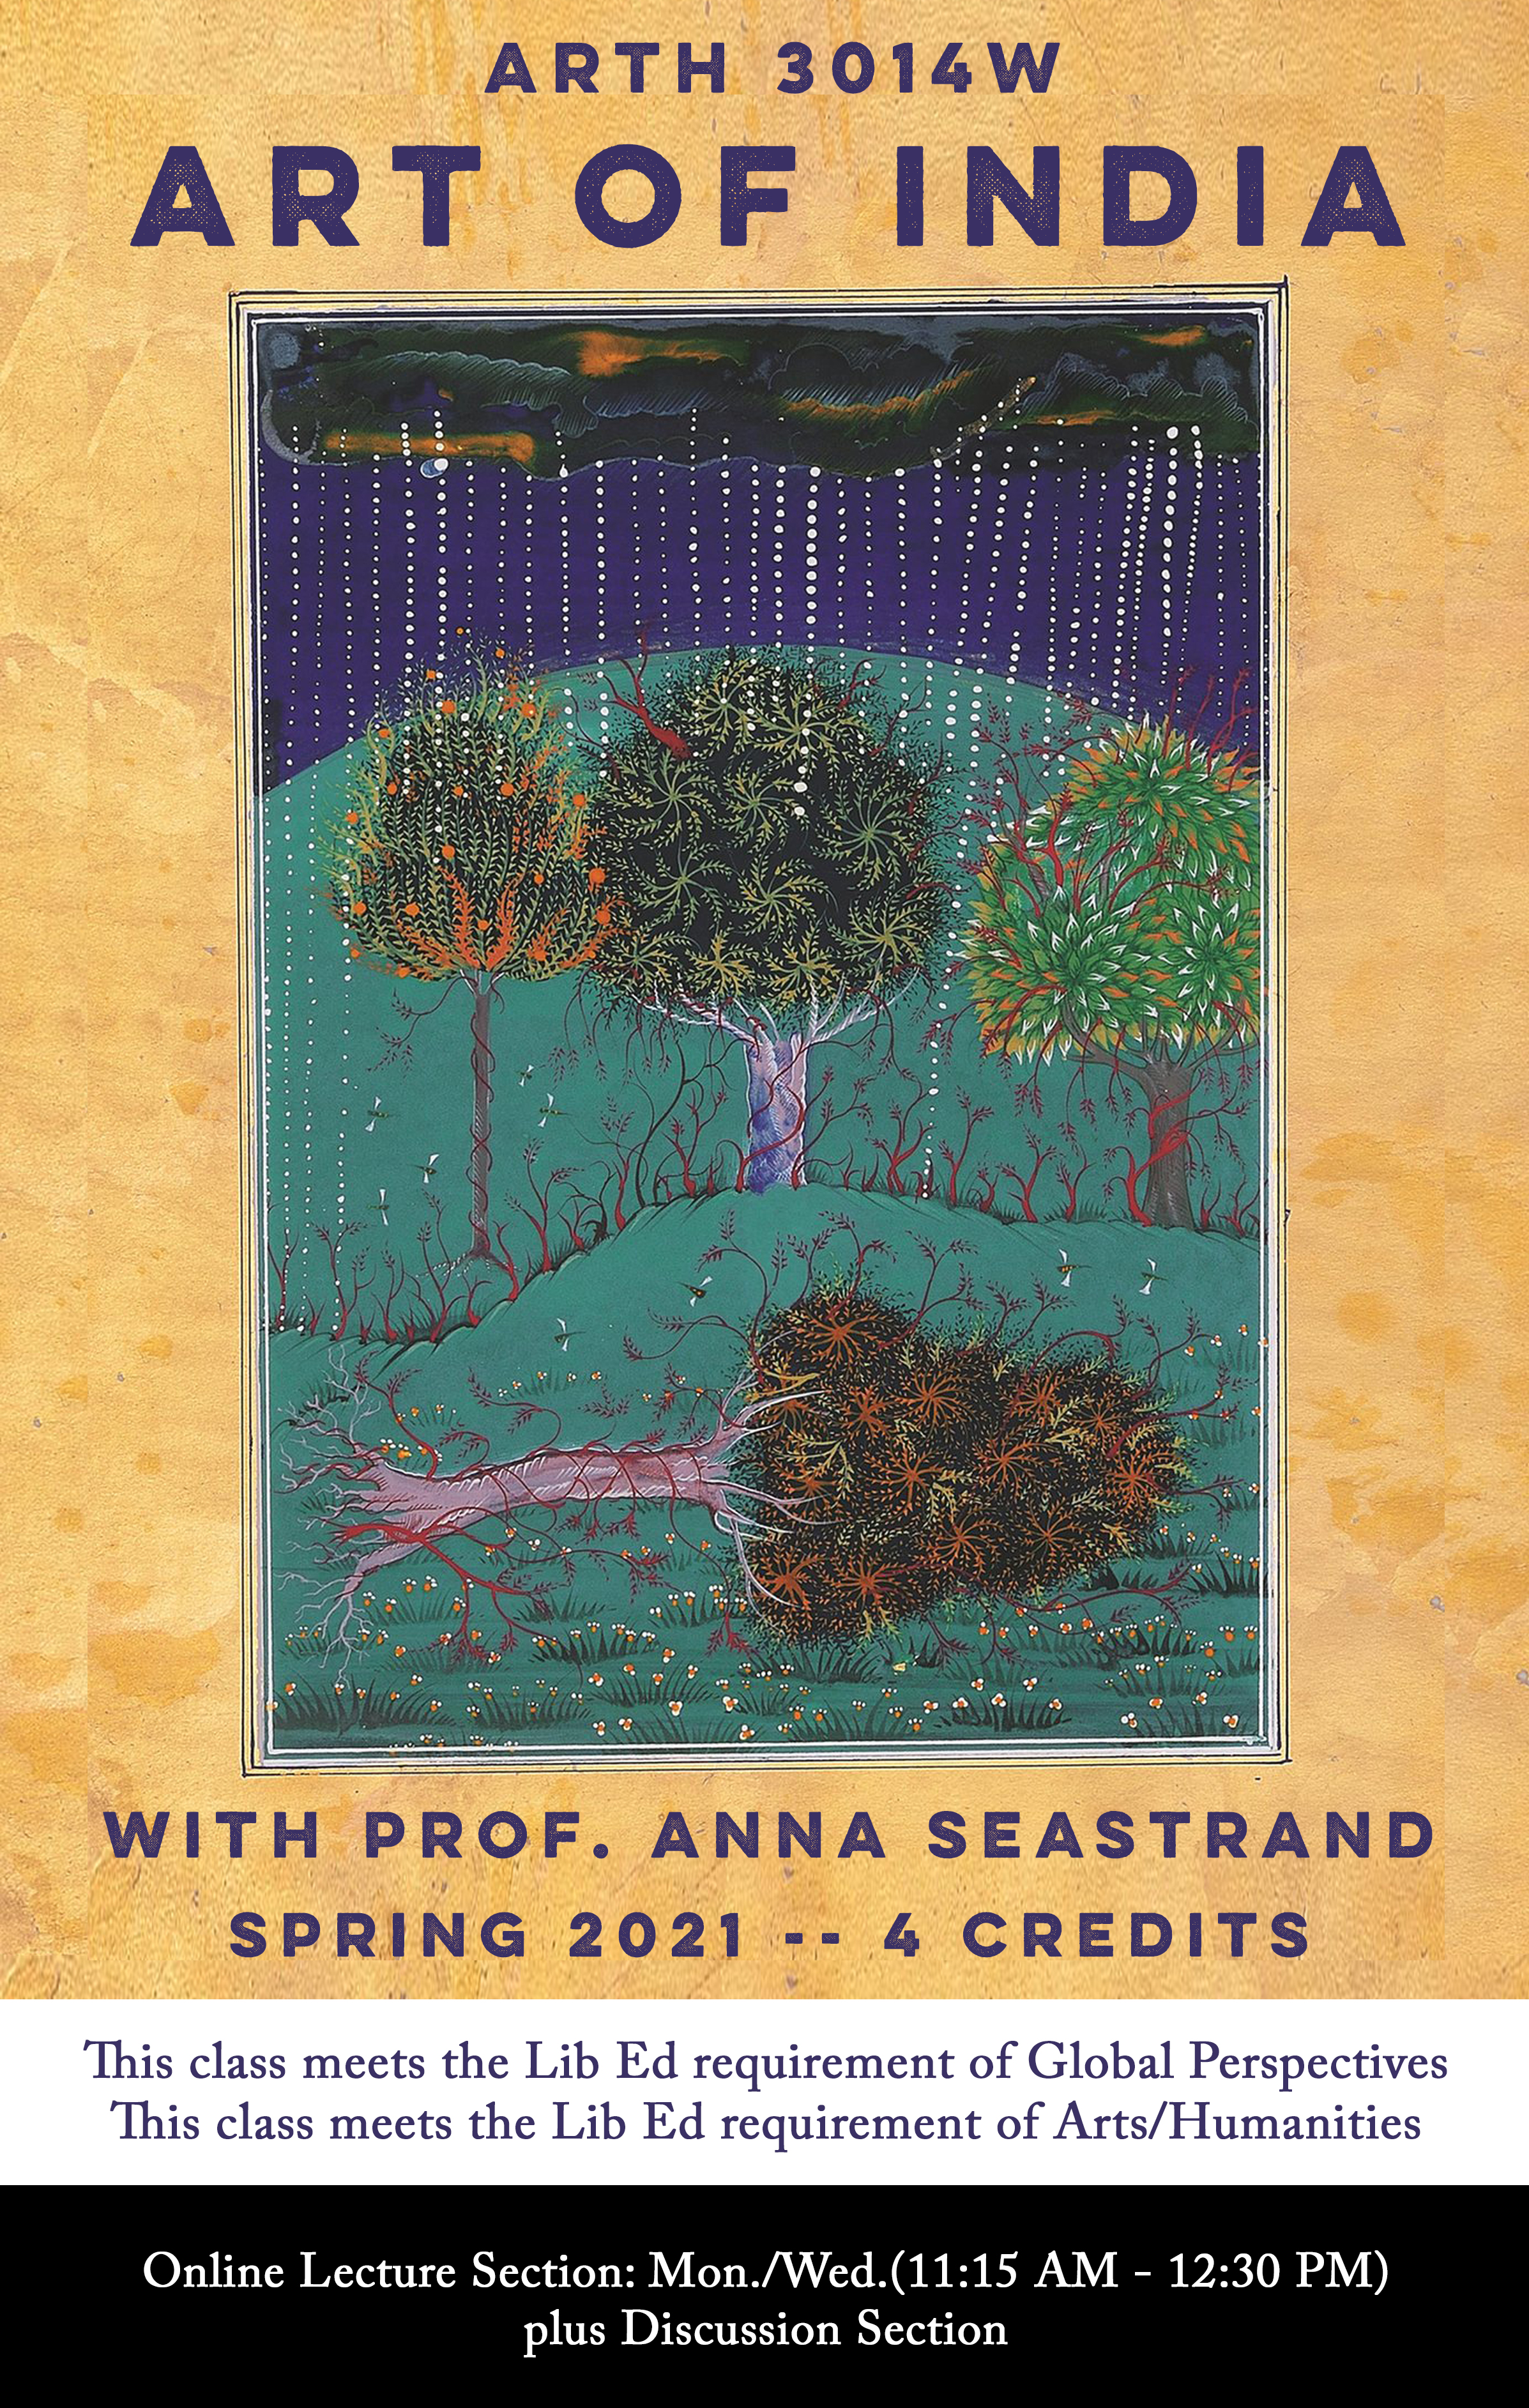 Course poster for ARTH 3014W Art of India with Prof. Anna Seastrand. Spring 2021. 4 credits. This class meets the Lib Ed requirement of Global Perspectives and Arts/Humanities